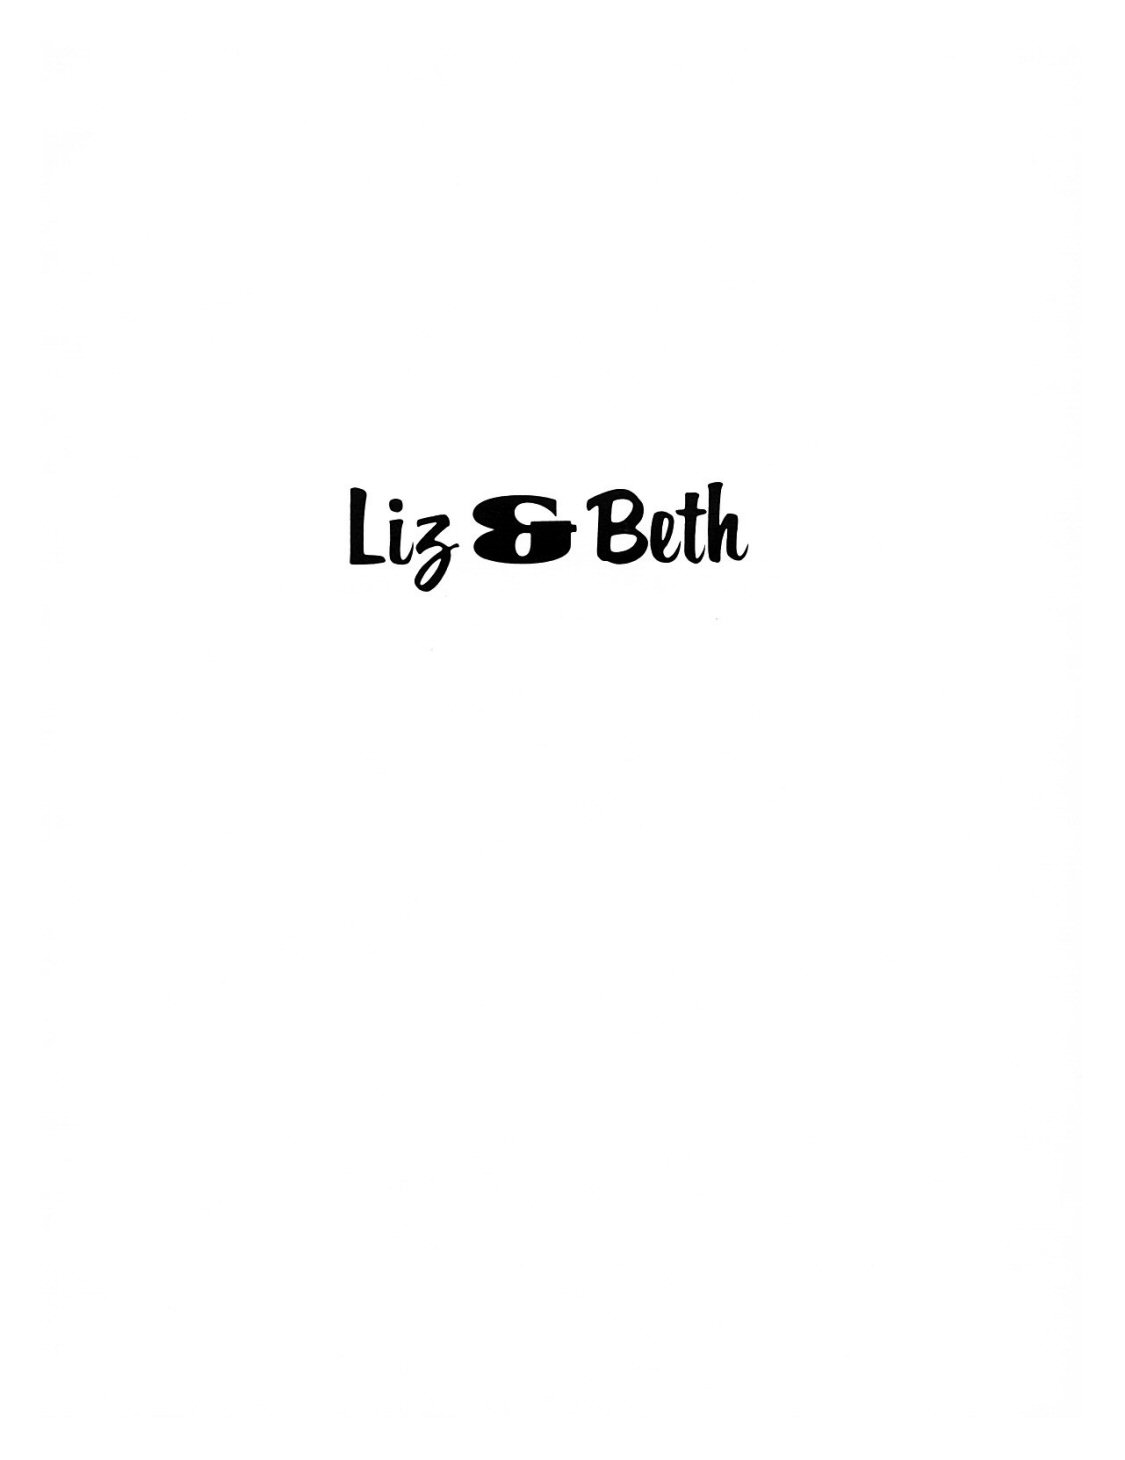 [G. Levis] Liz and Beth #3: Tit For Twat [English] 